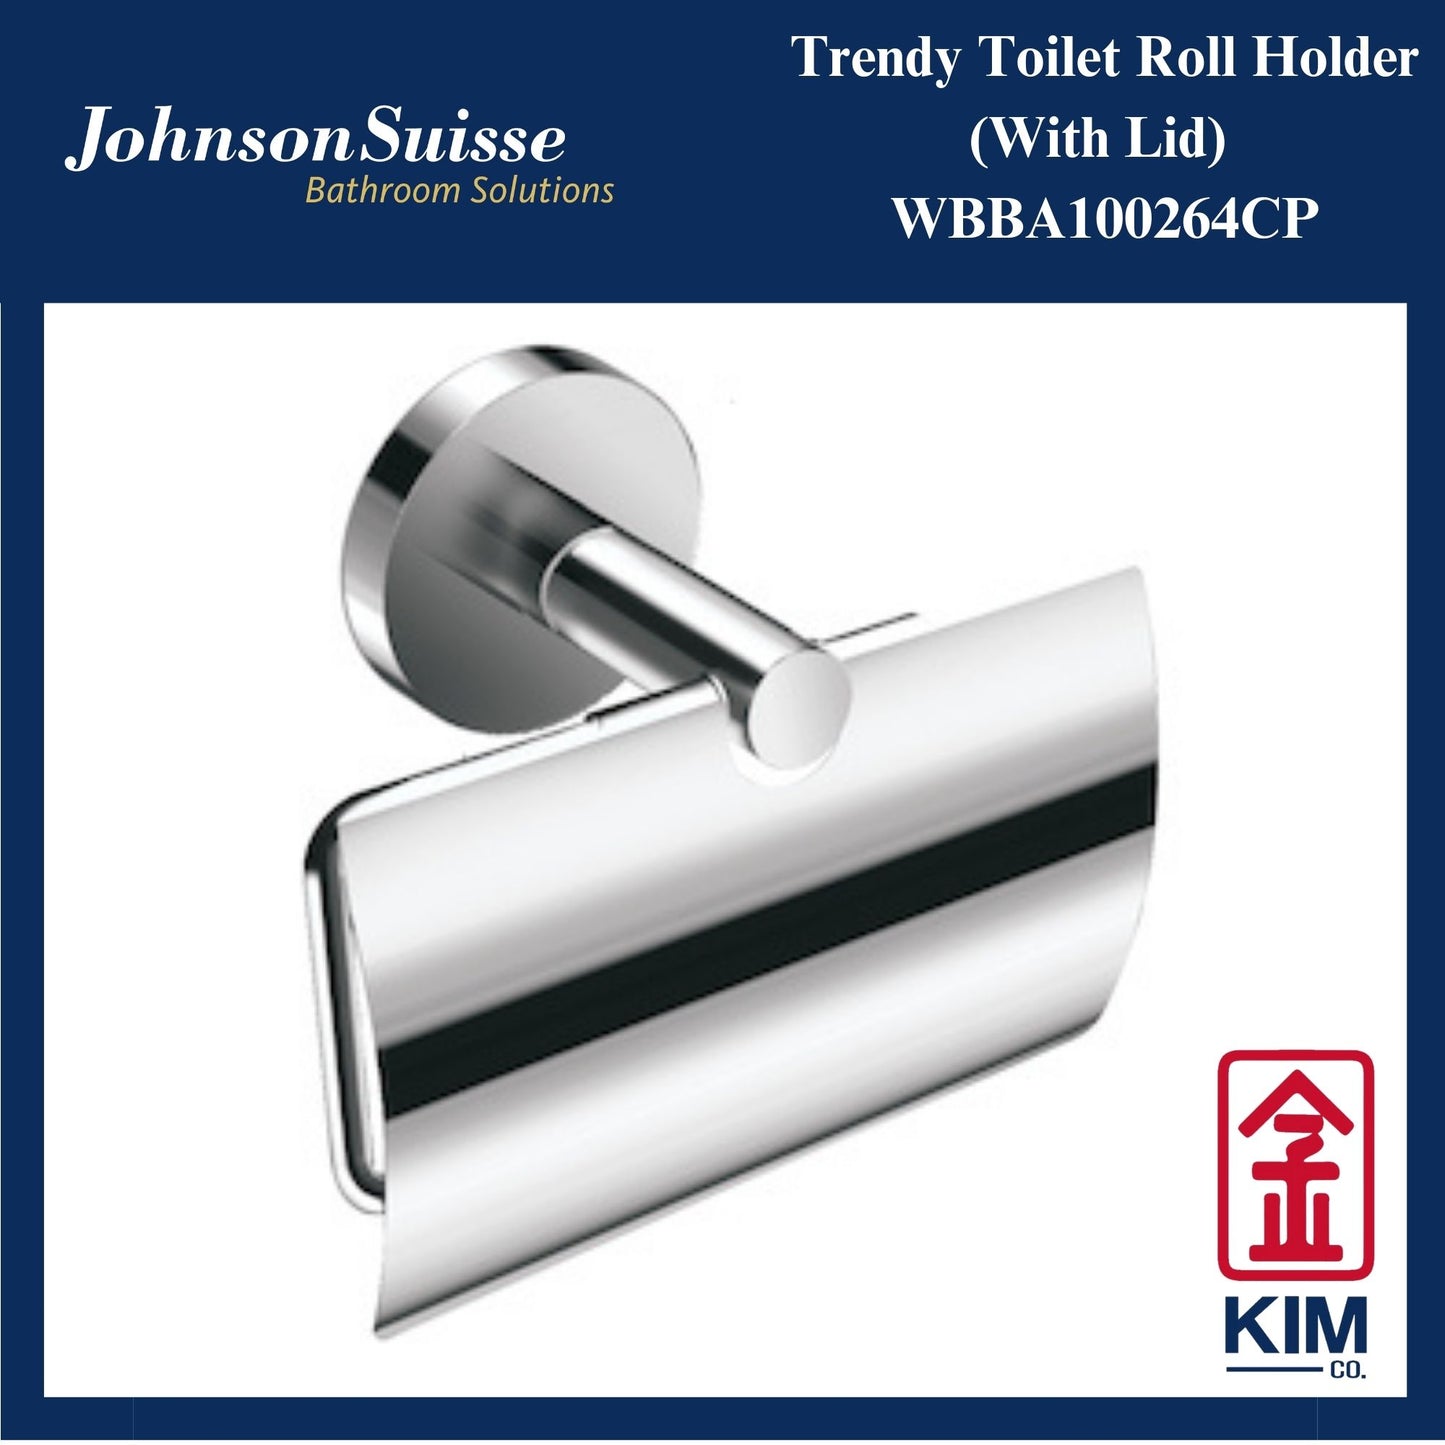 Johnson Suisse Trendy Toilet Roll Holder With Lid (WBBA100264CP)